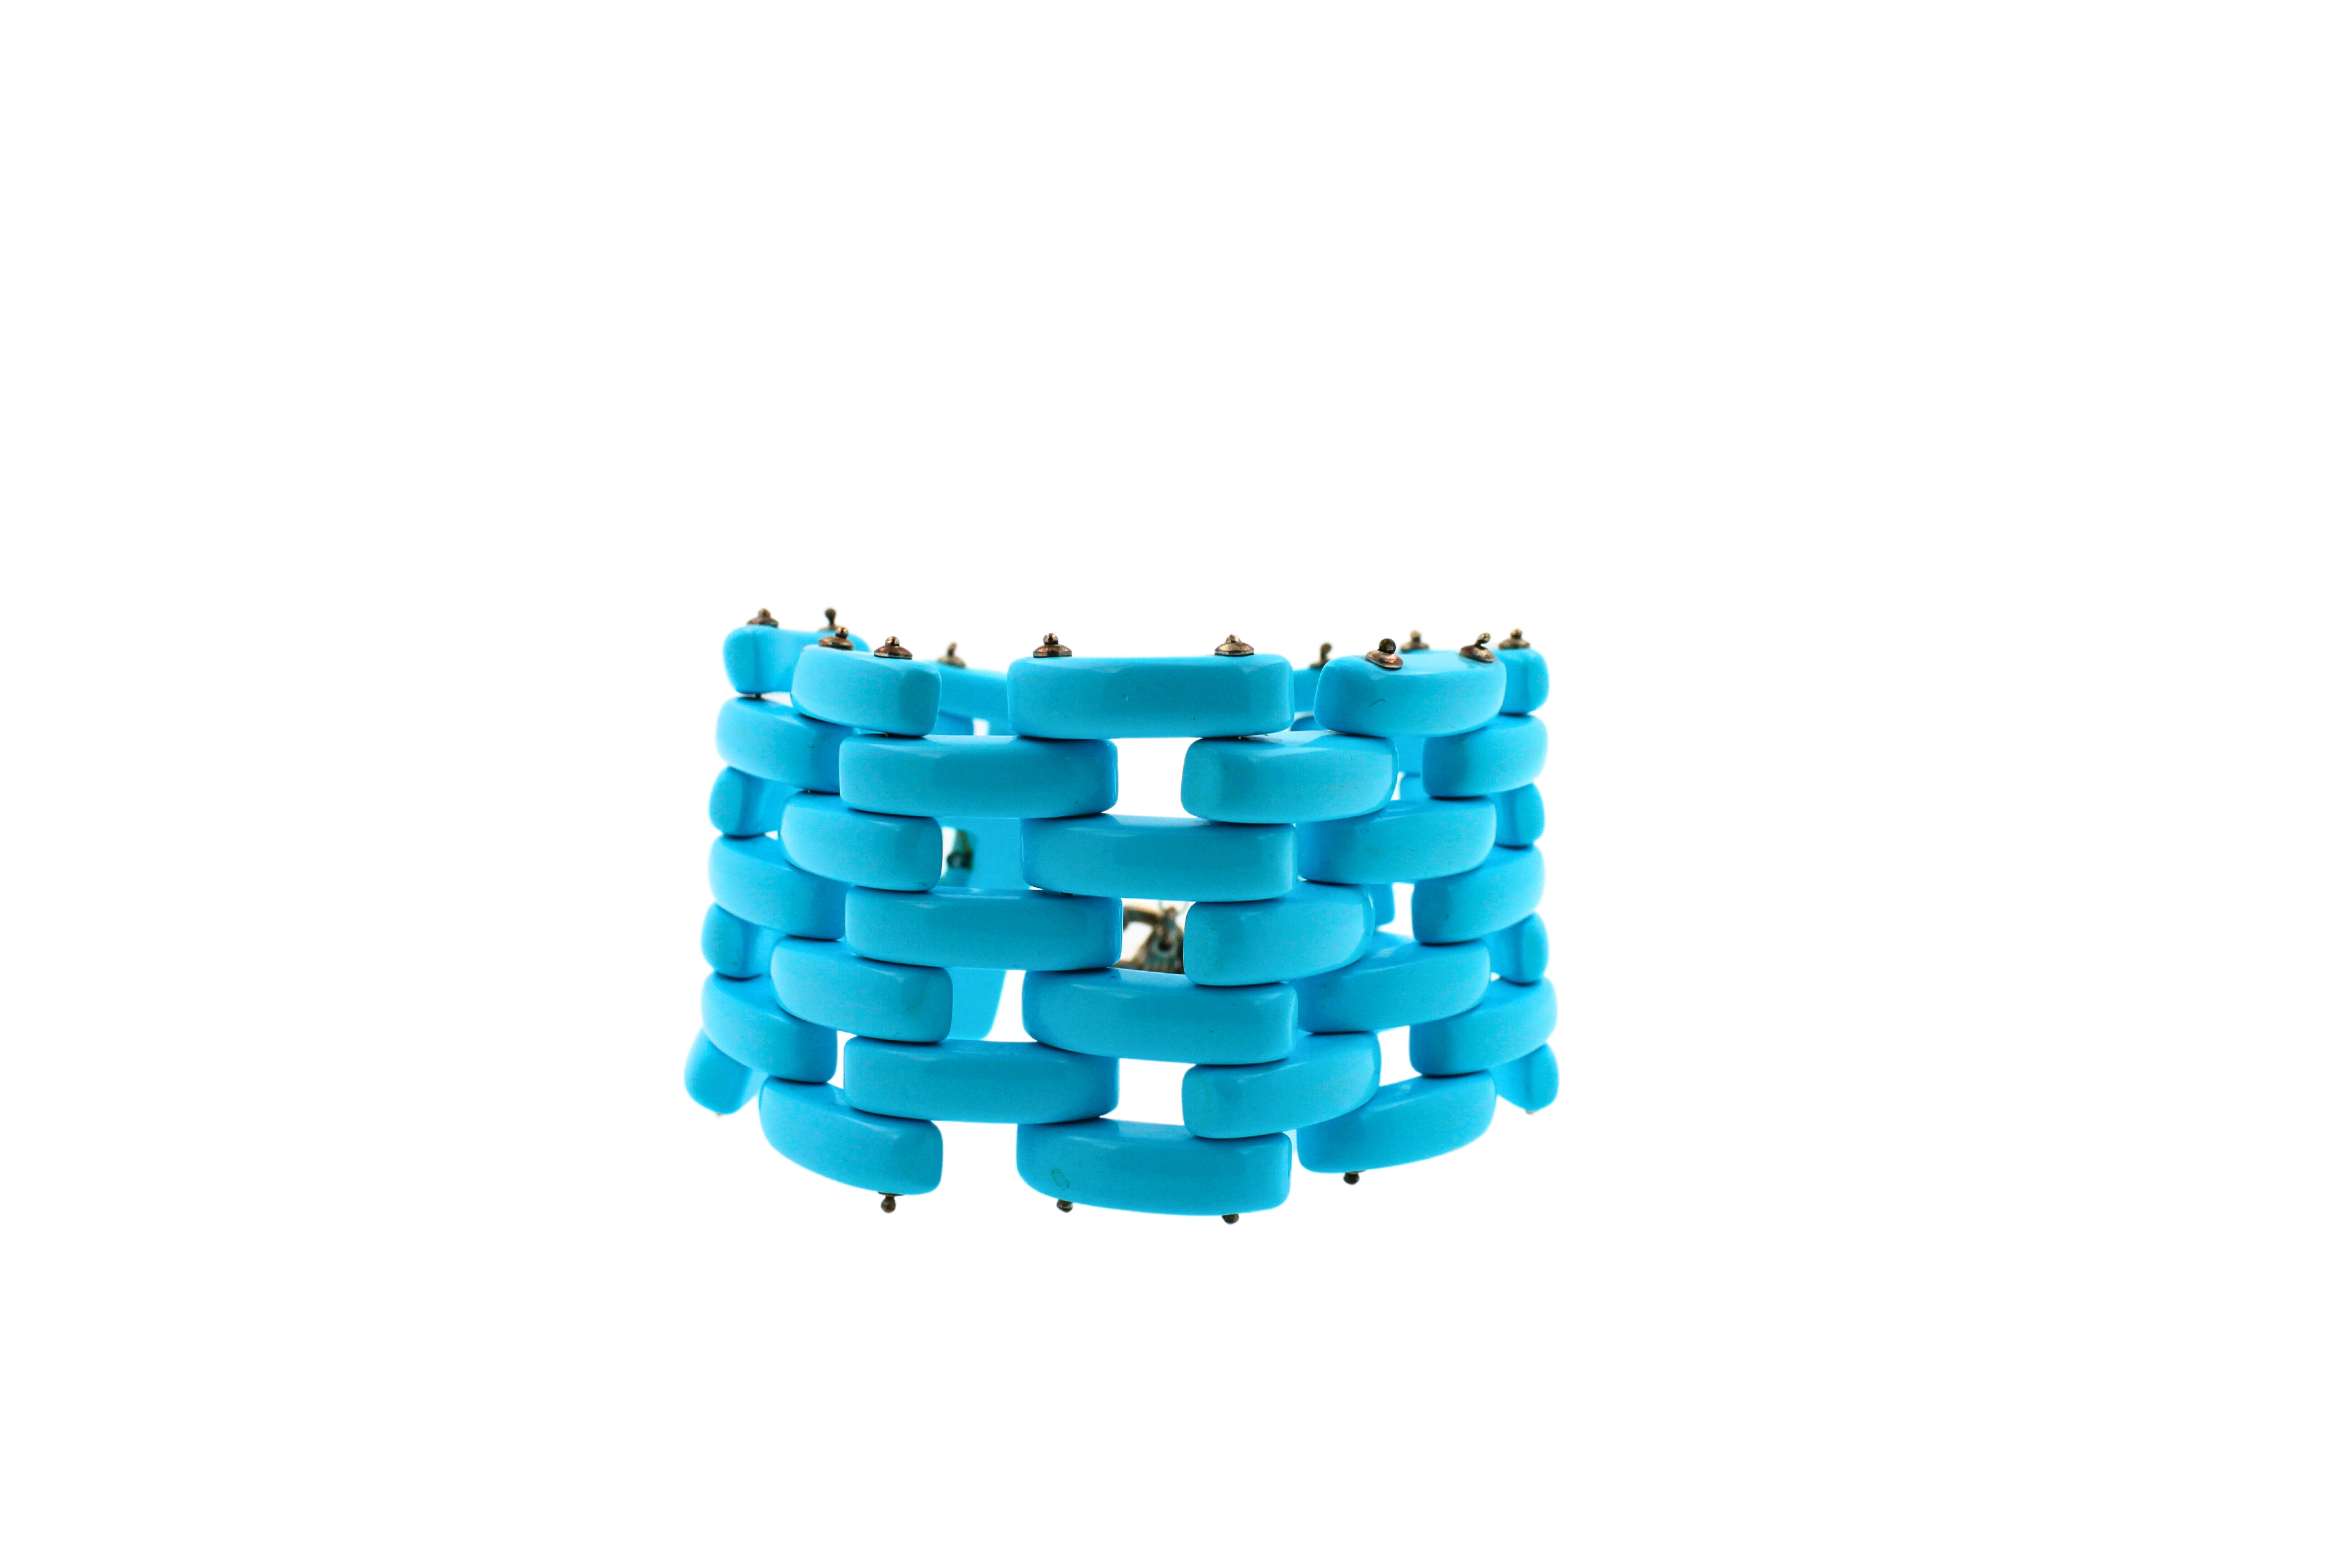 Teal Blue Turquoise Fancy Cabochon Elongated Link Wide Unique Statement Bracelet
Length of Bracelet - 8 Inches
Width: 40mm
Silver Clasp
Made in Italy